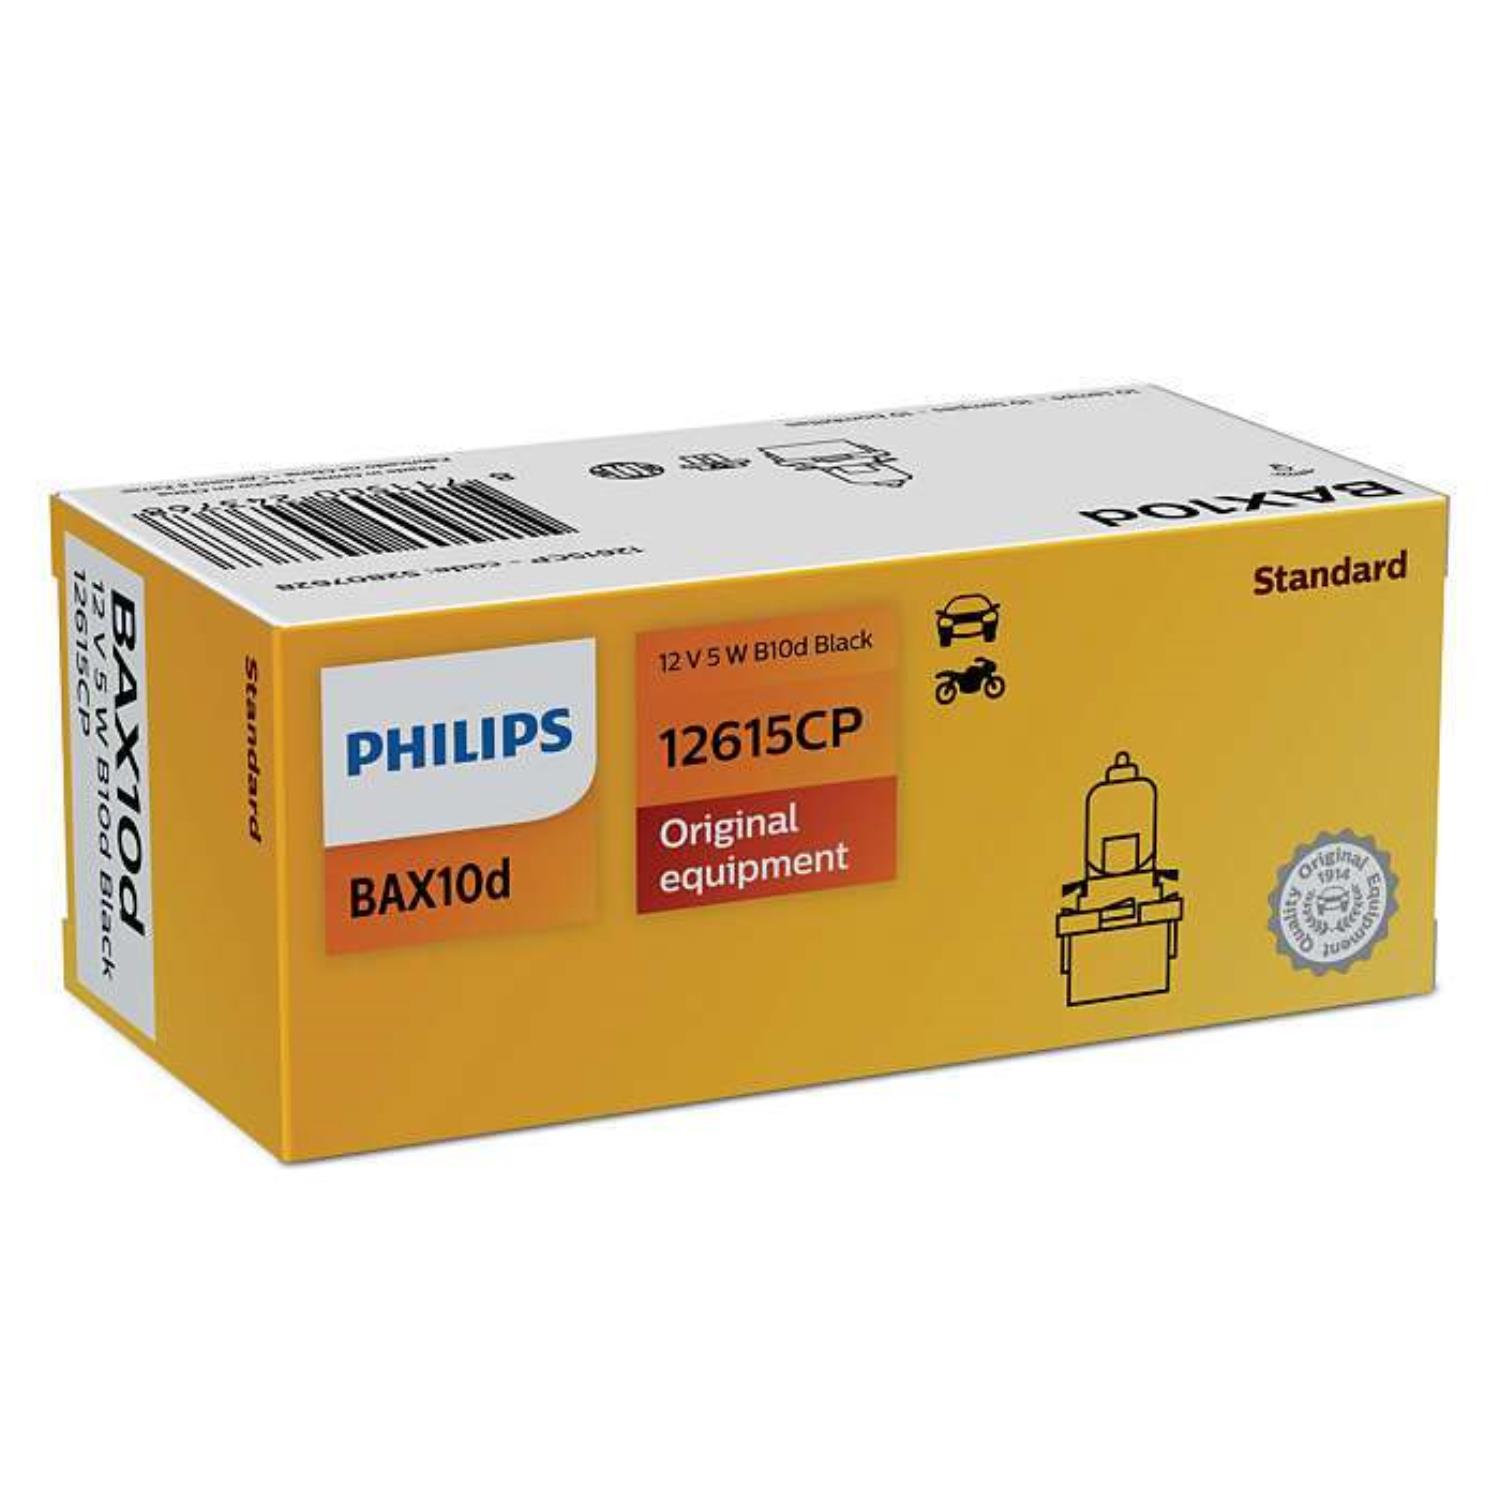 PHILIPS 12615CP Glühlampe Beleuchtung